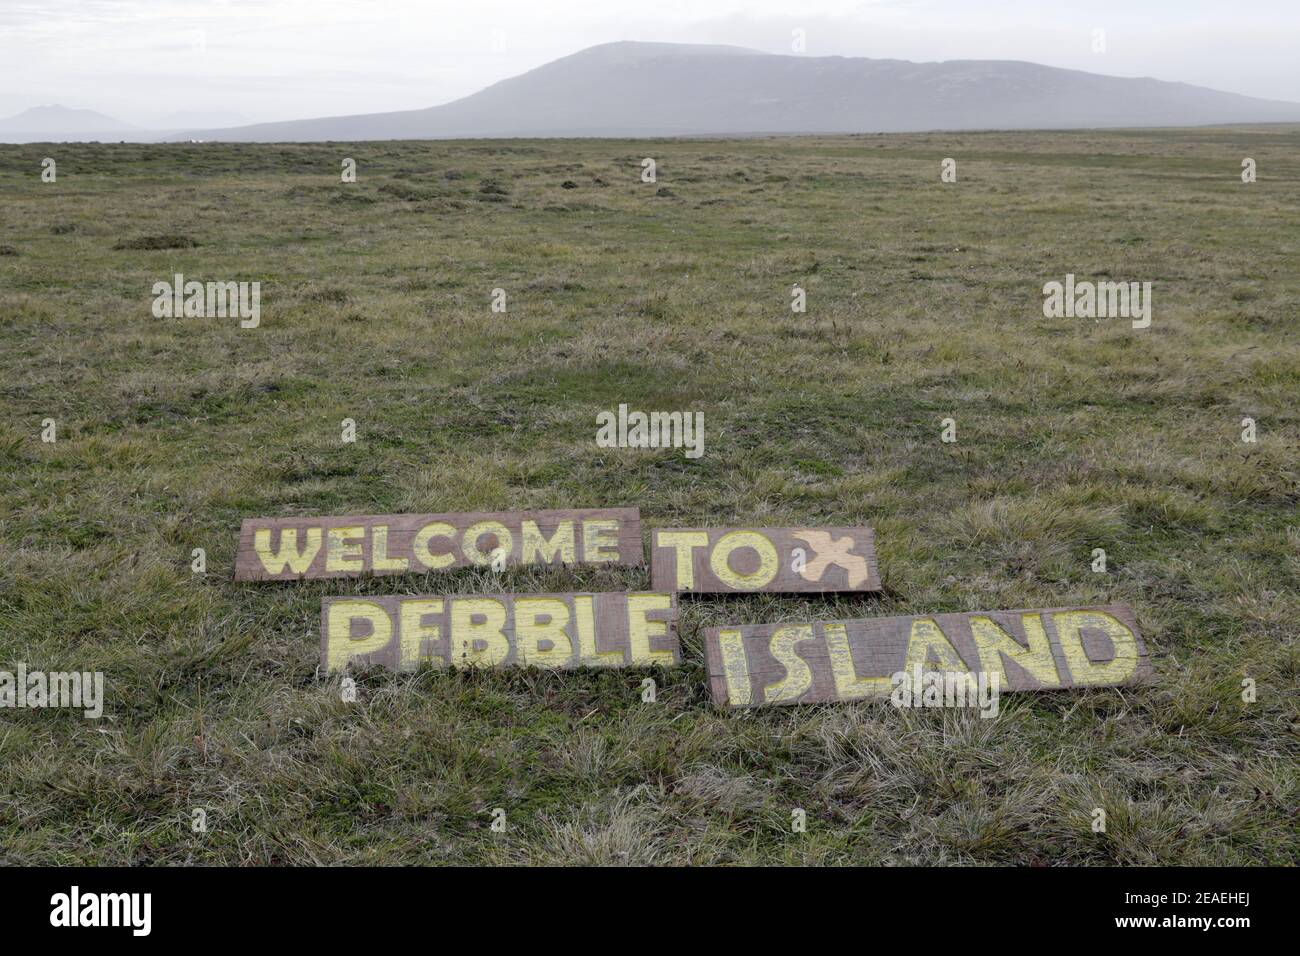 Falkland Islands, Pebble Island Welcome sign by airstrip Stock Photo